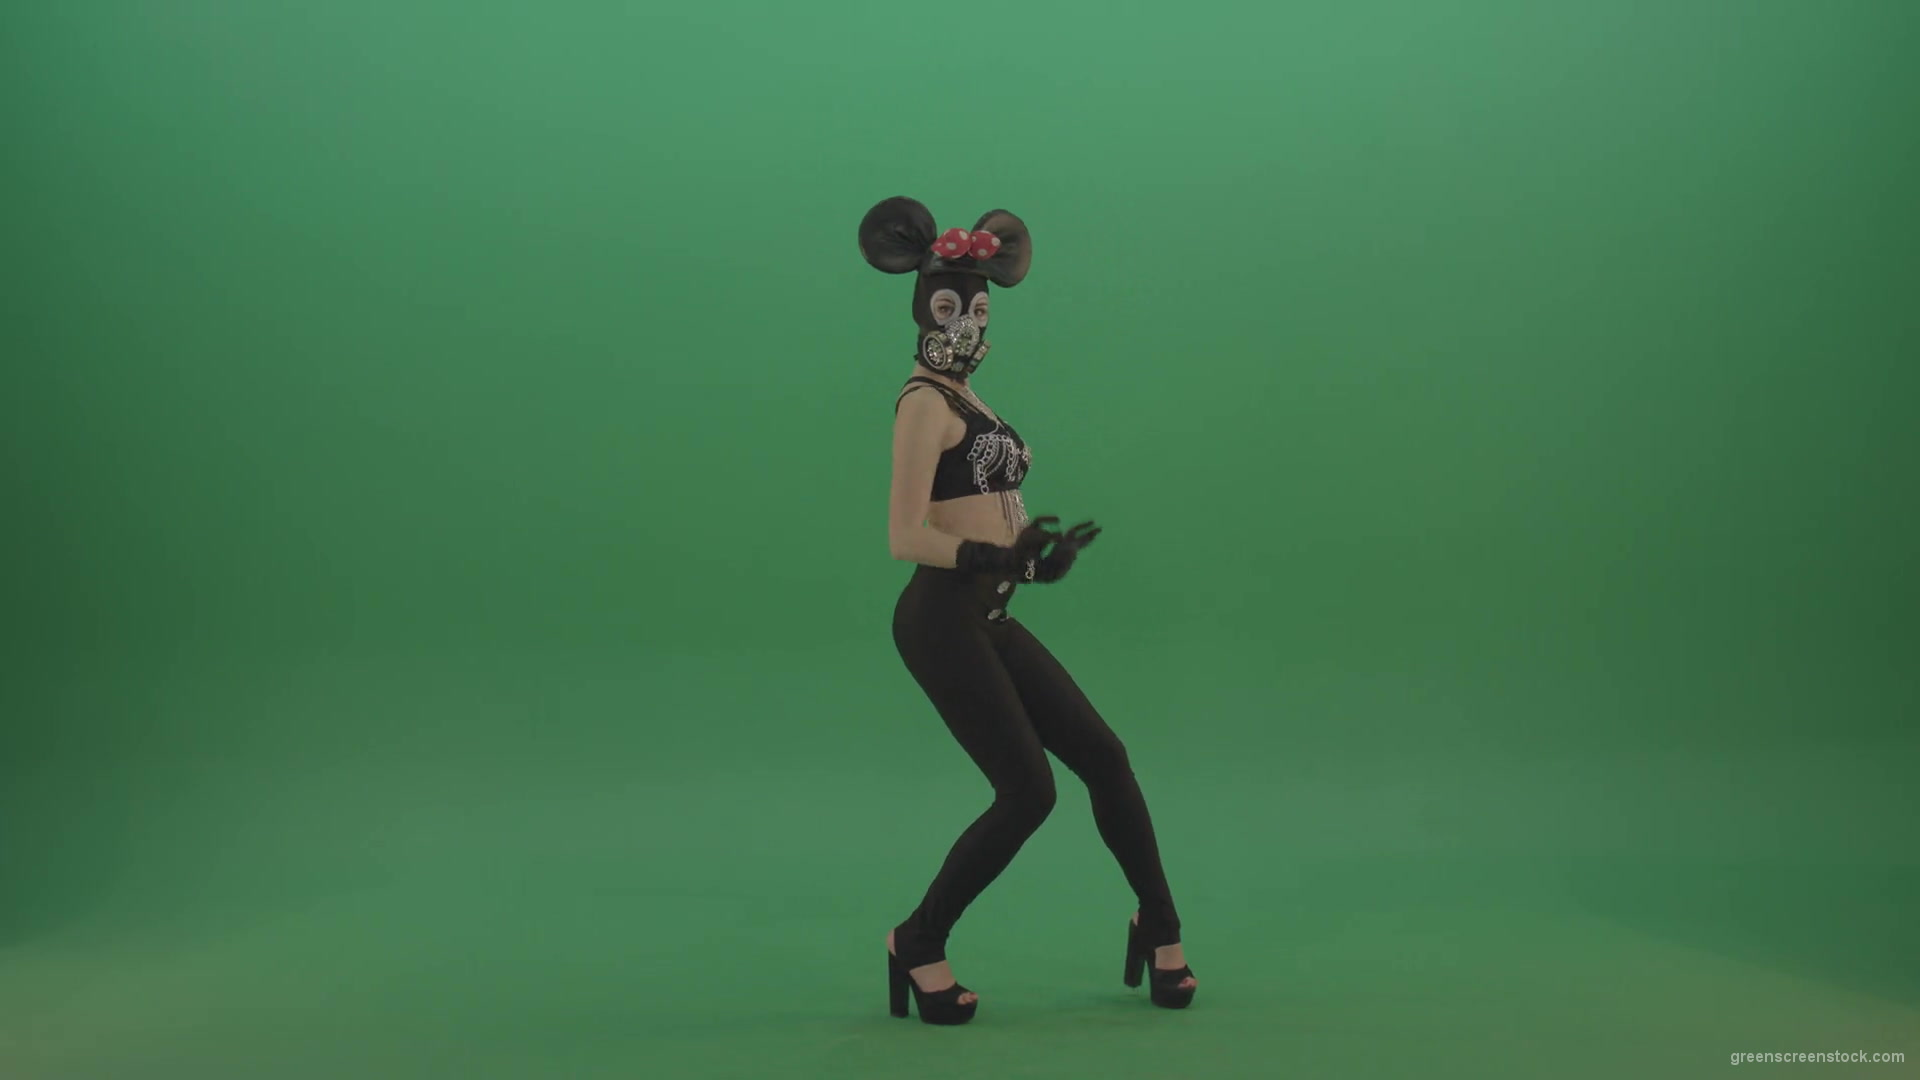 Sexy-dancing-mouse-girl-slowly-dance-in-mask-on-green-screen-1920_007 Green Screen Stock